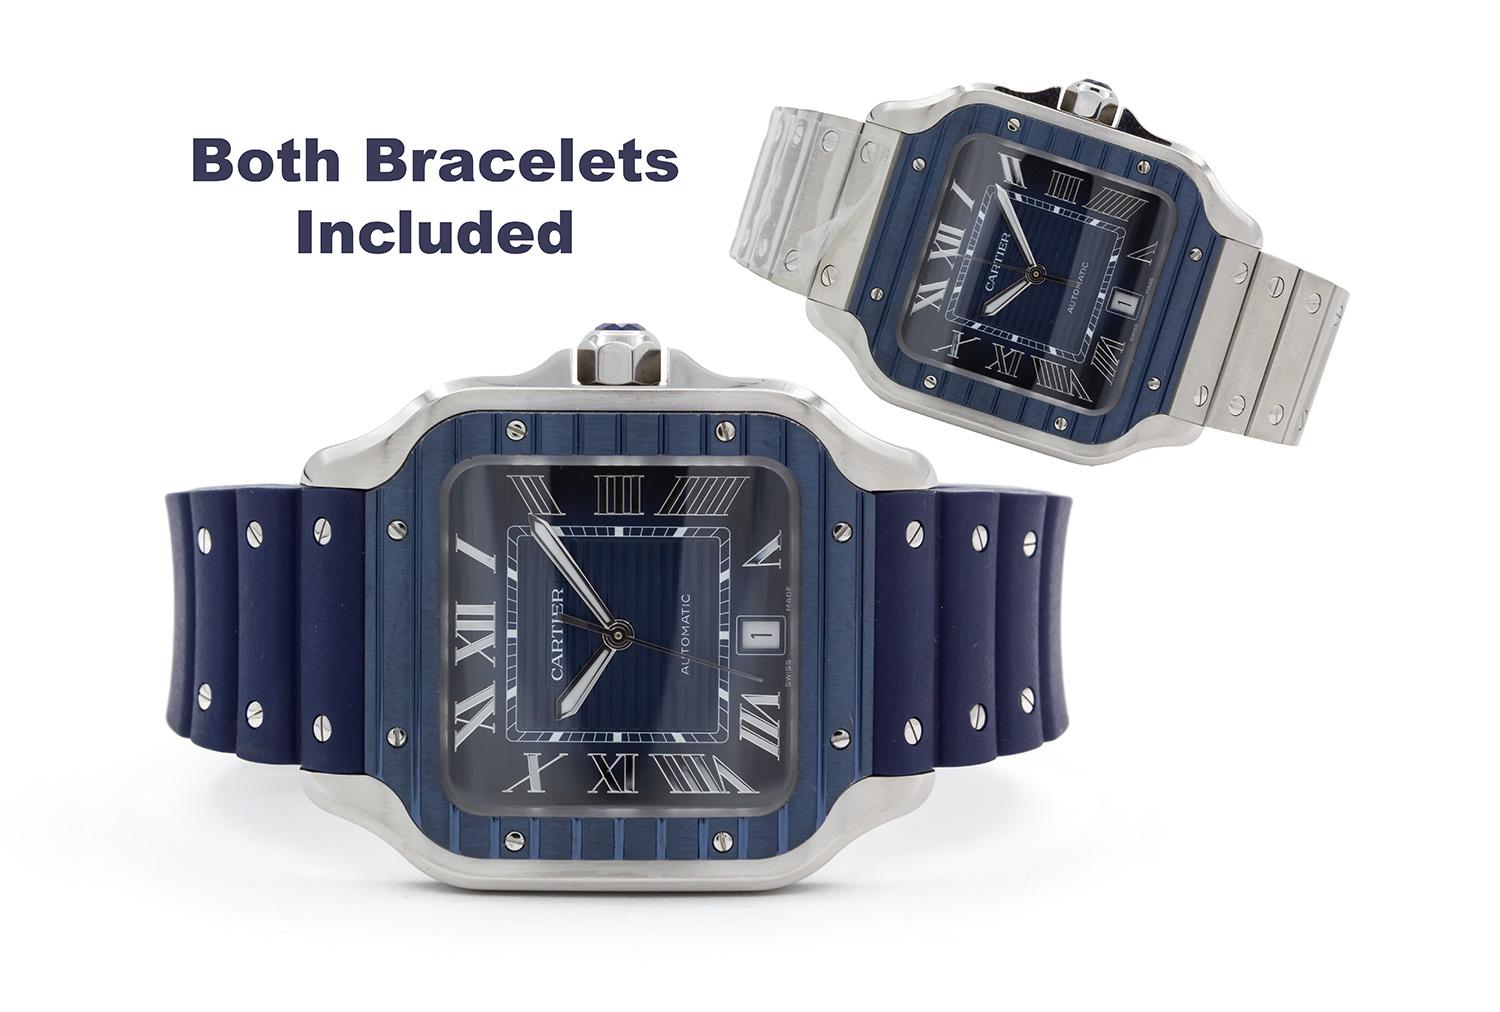 We are pleased to offer this 2022 Large Cartier Santos De Cartier WSSA0048 with extended international good through 05/2030. It comes with the Cartier blue rubber strap and unworn Cartier stainless steel bracelet which still has the protective